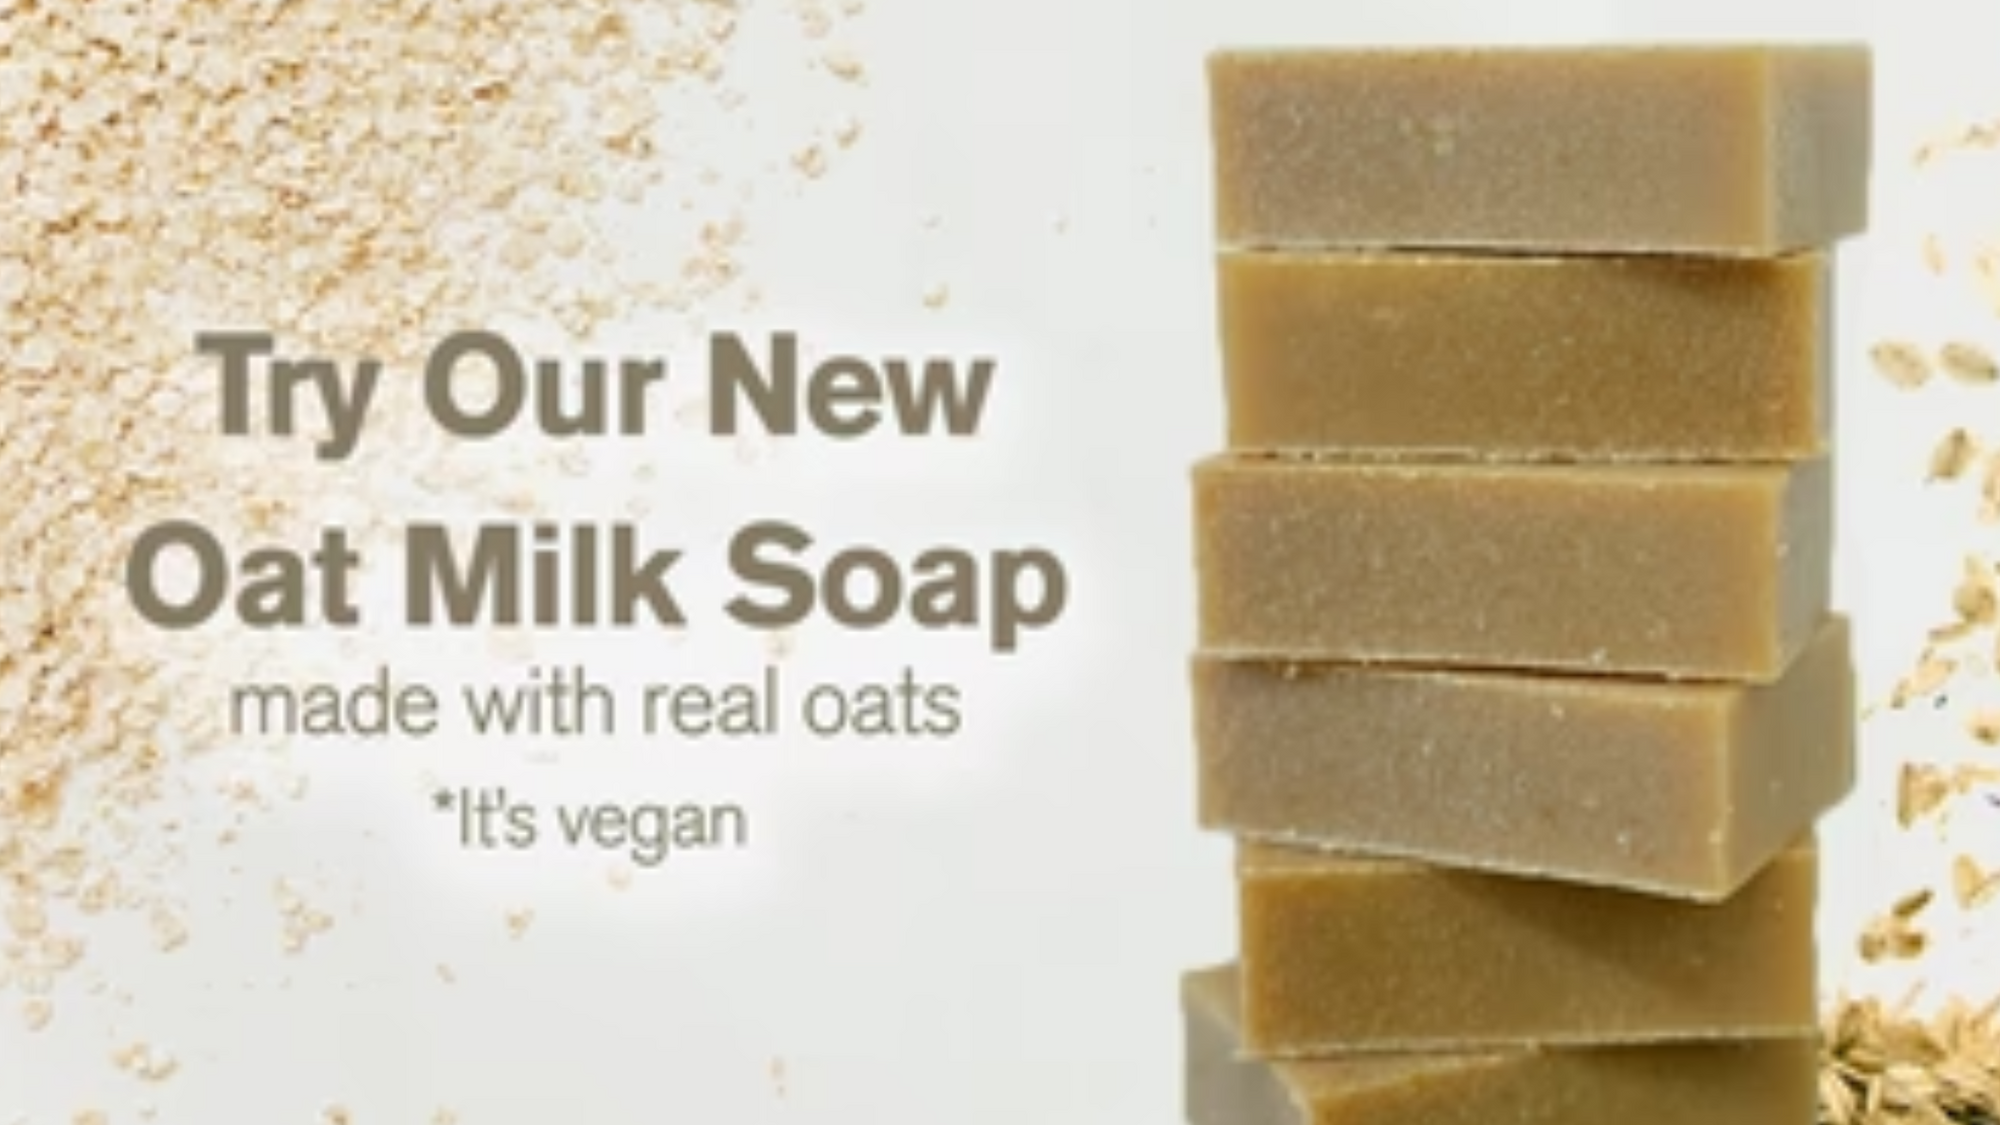 Try our new Oat Milk Soap